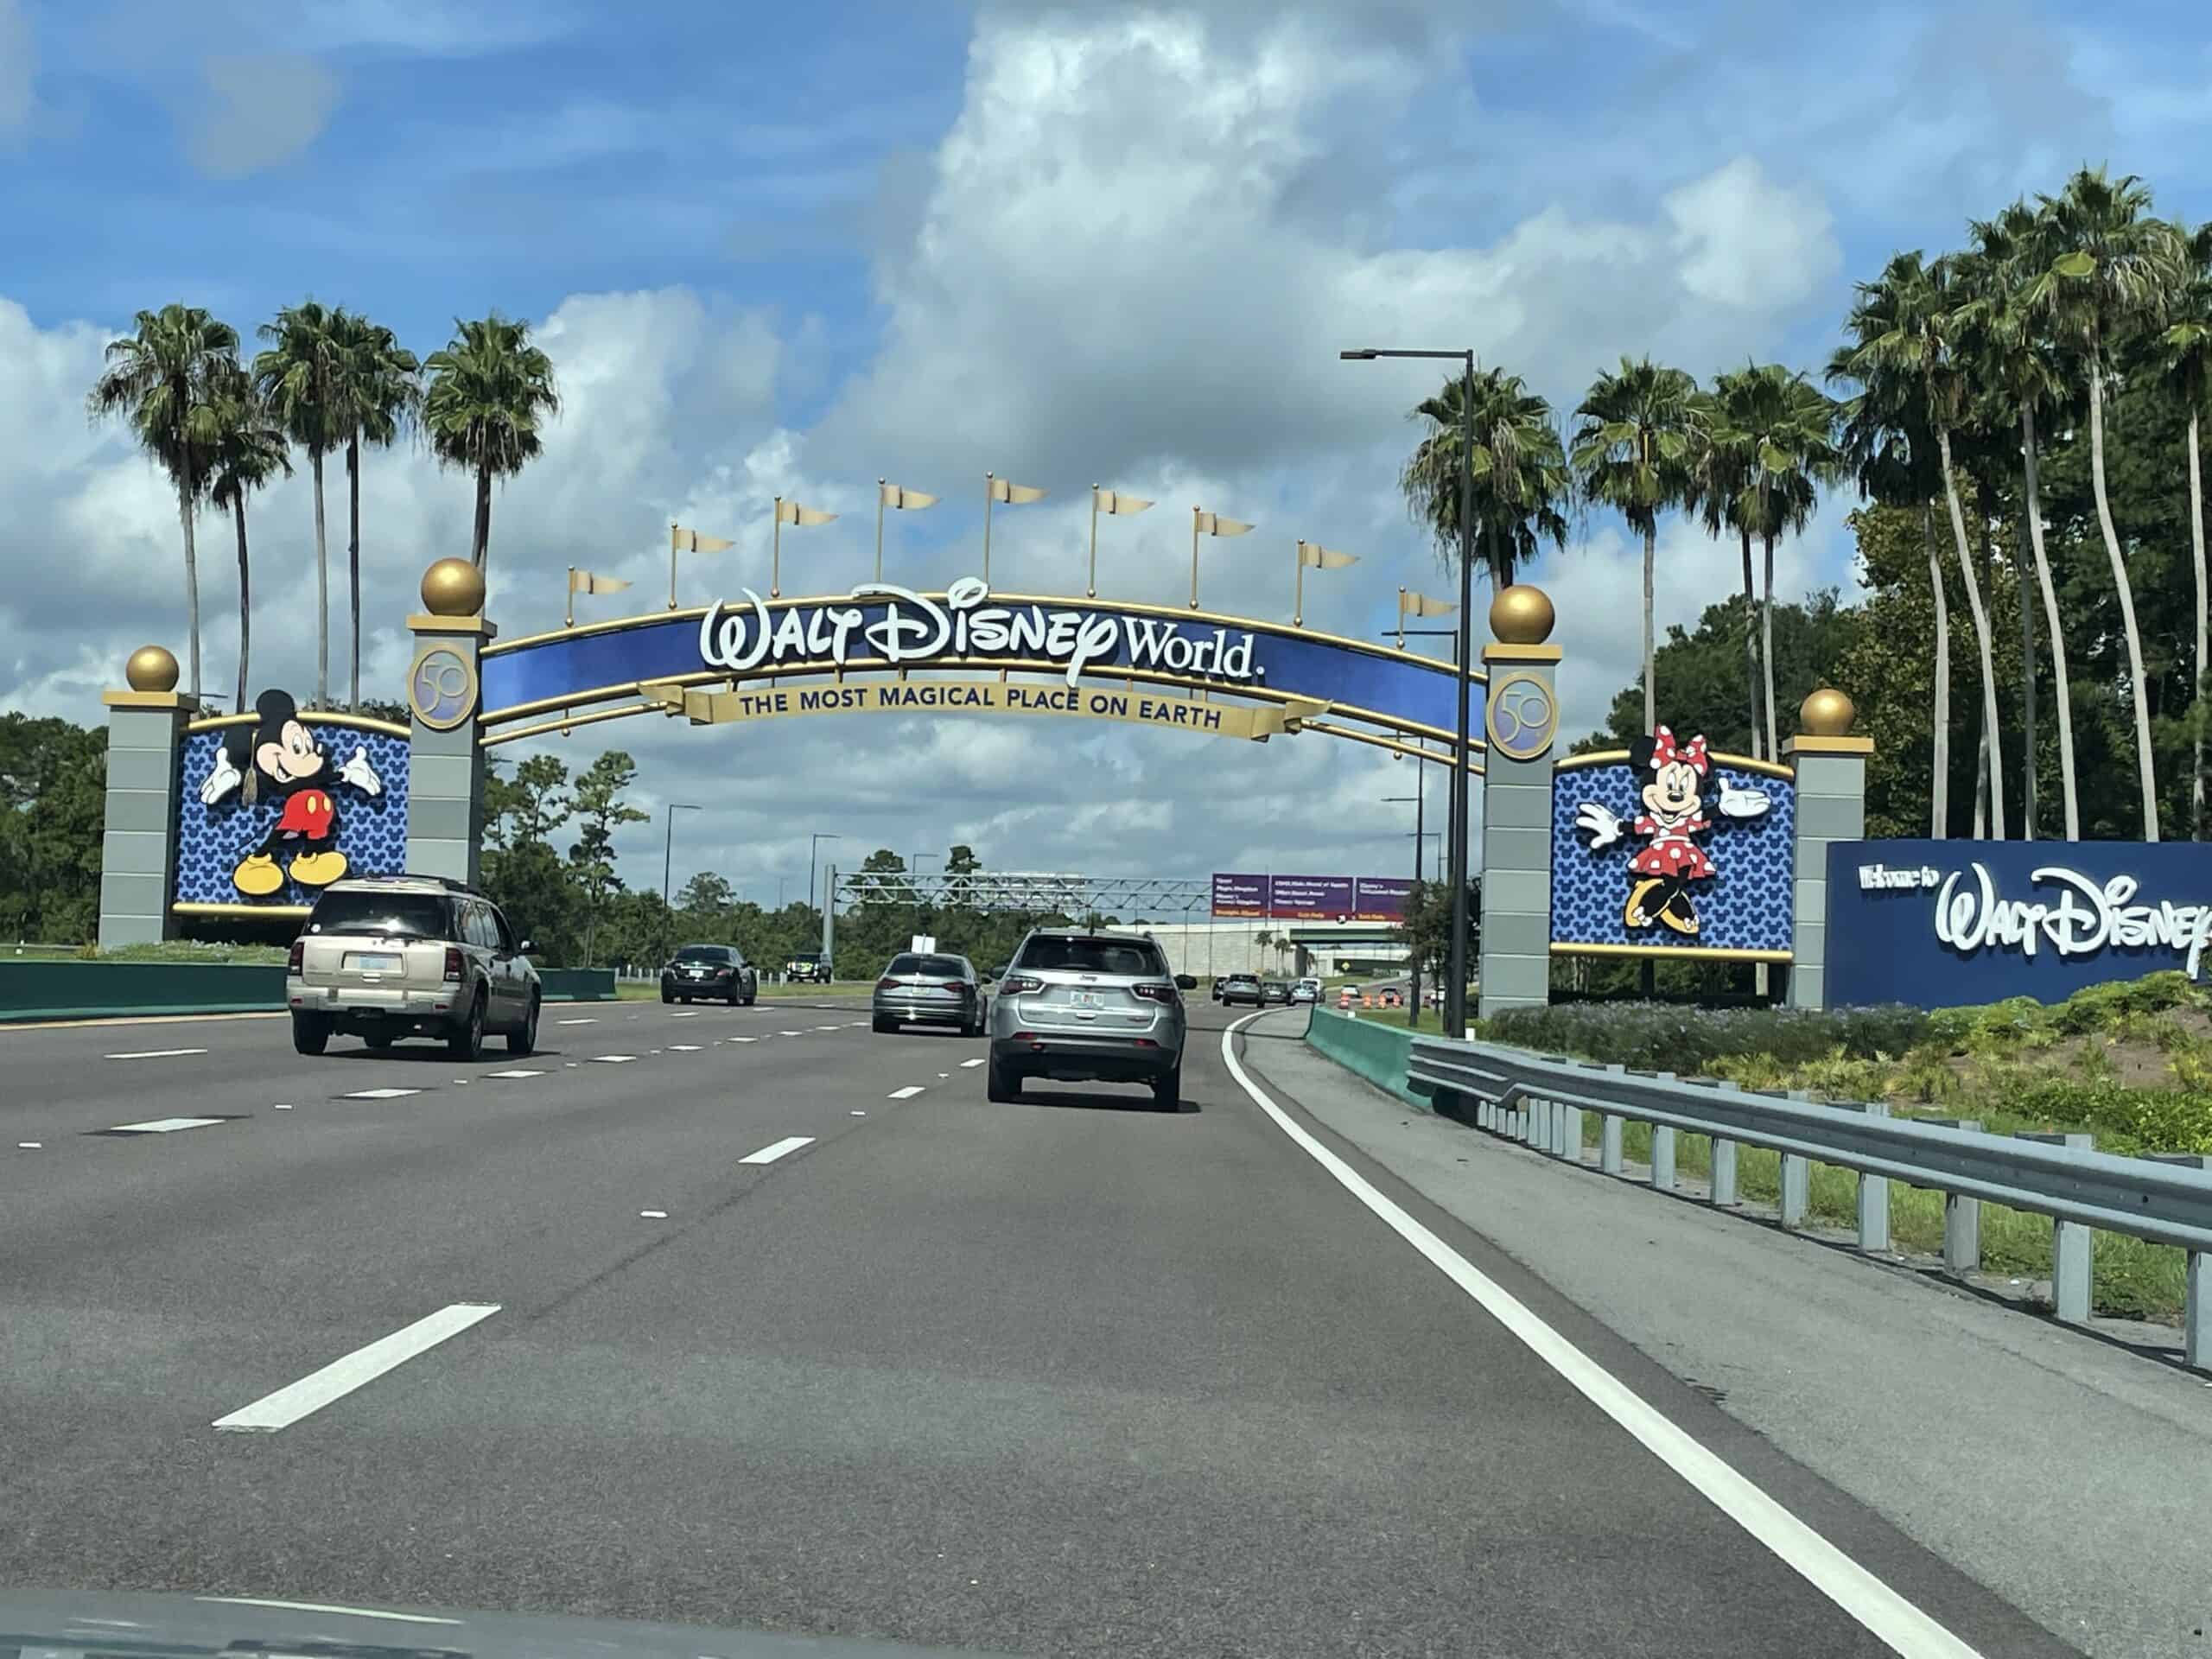 How To Drive From Orlando International Airport To Walt Disney World (Video Guide Inside)